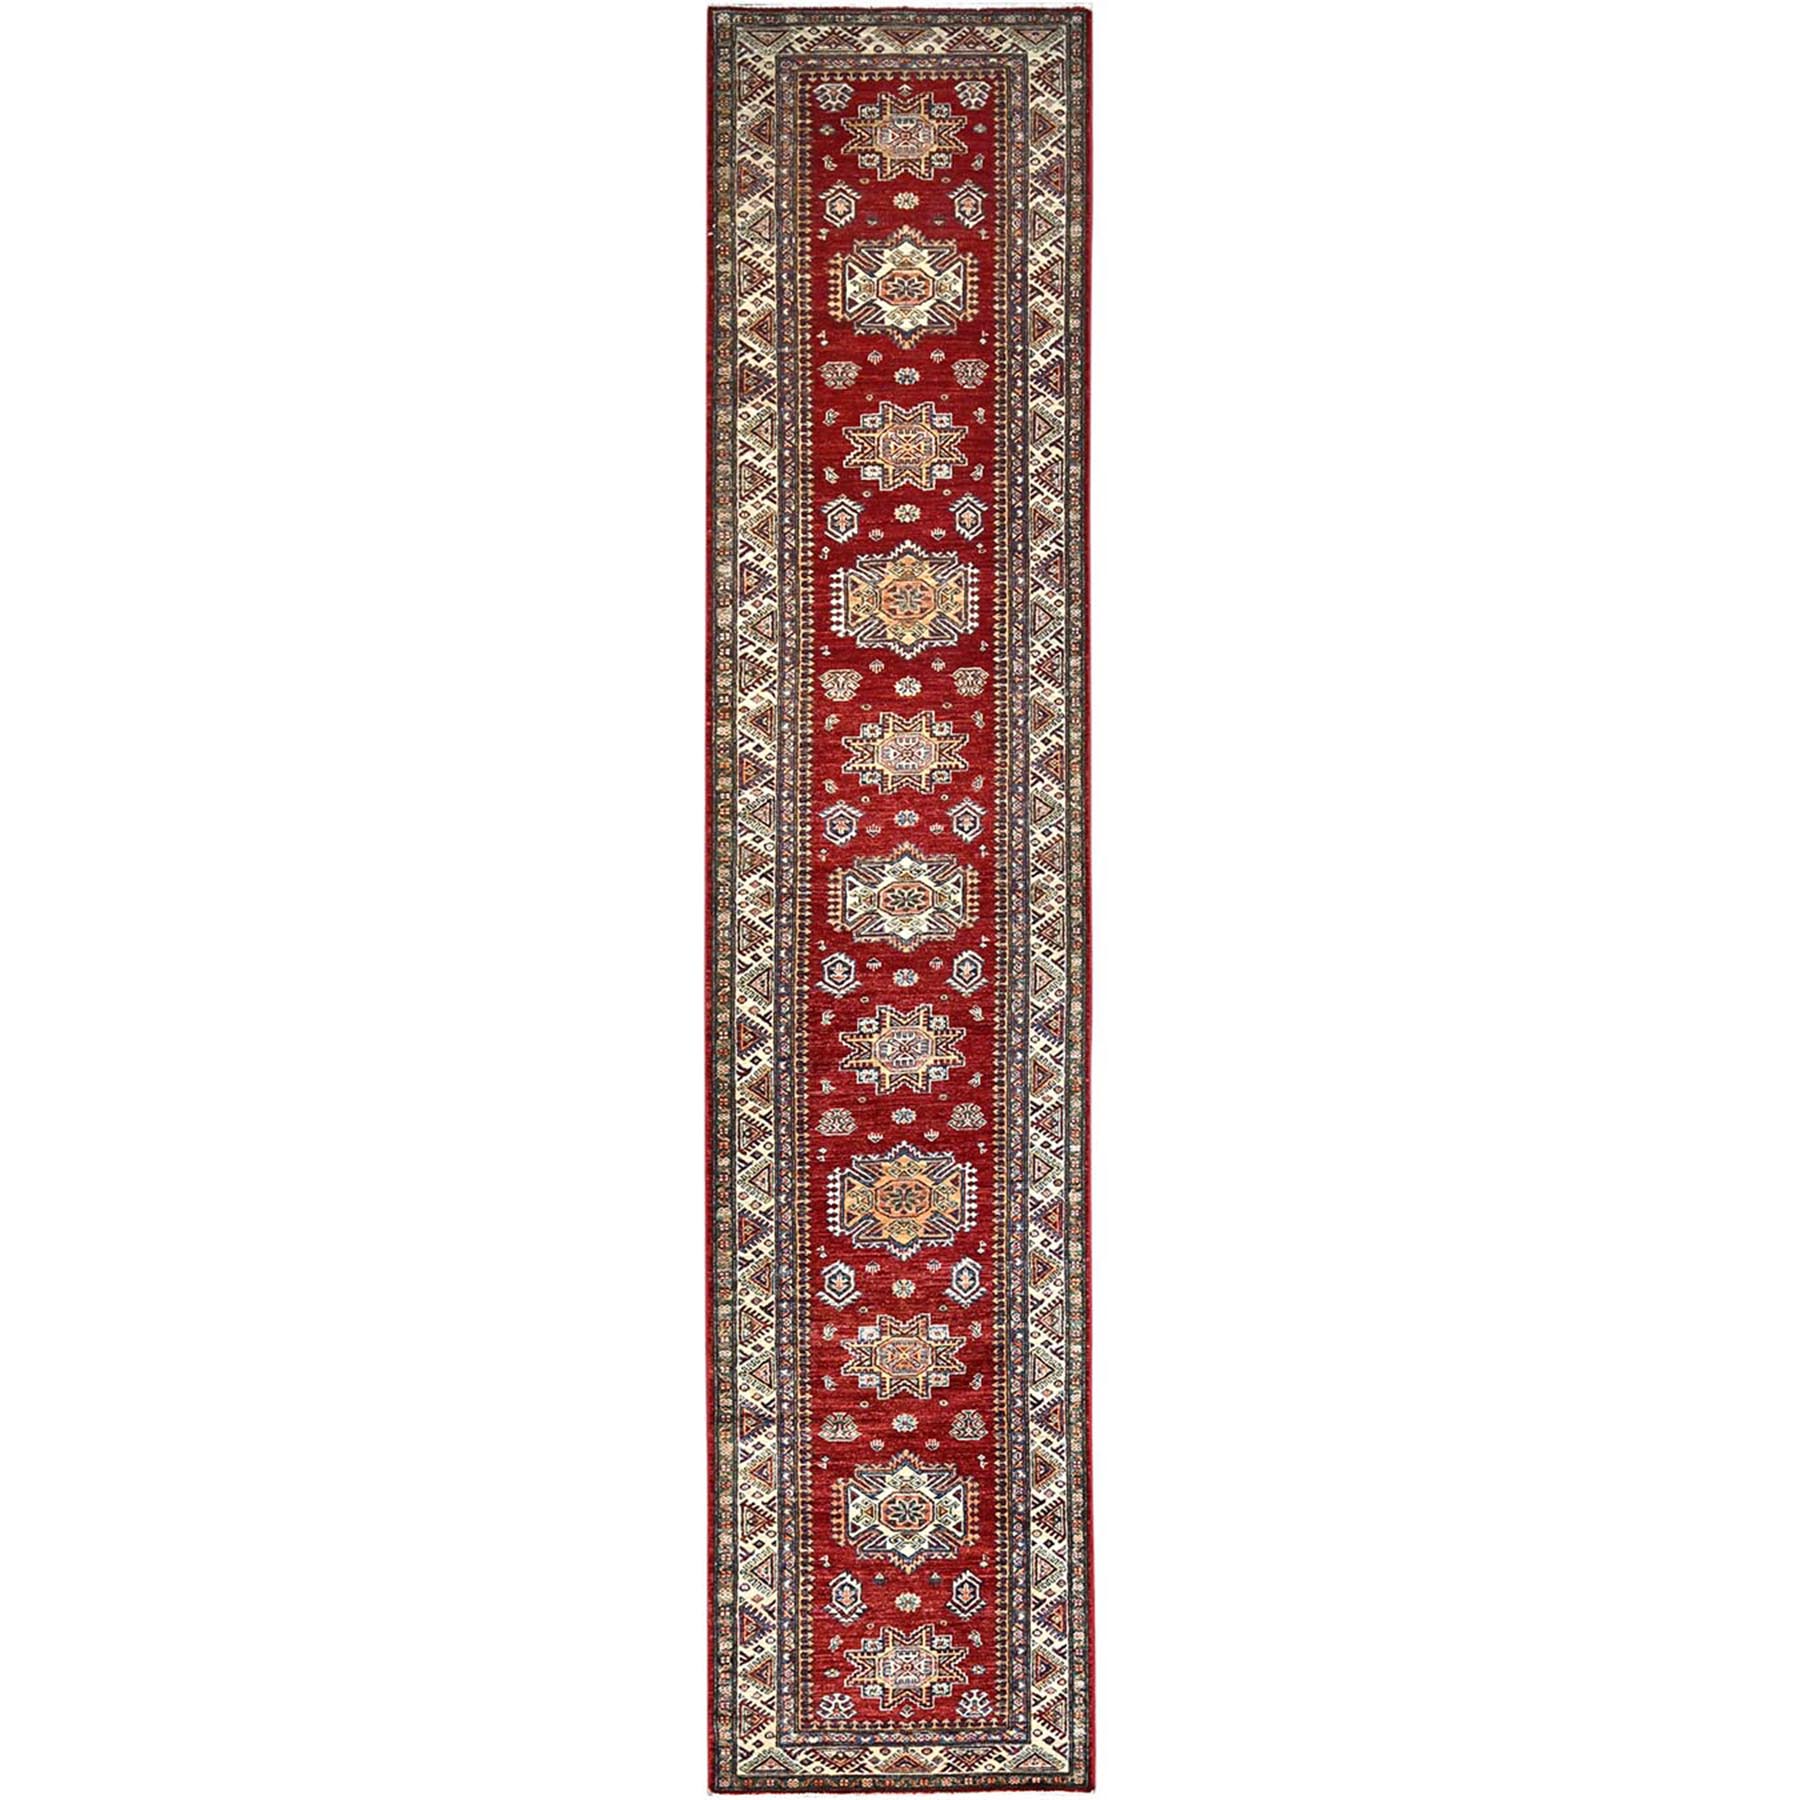 Ruby Red With Origami White, Afghan Super Kazak With Geometric Motifs, Natural Dyes, Densely Woven, All Wool, Hand Knotted, Runner Oriental Rug